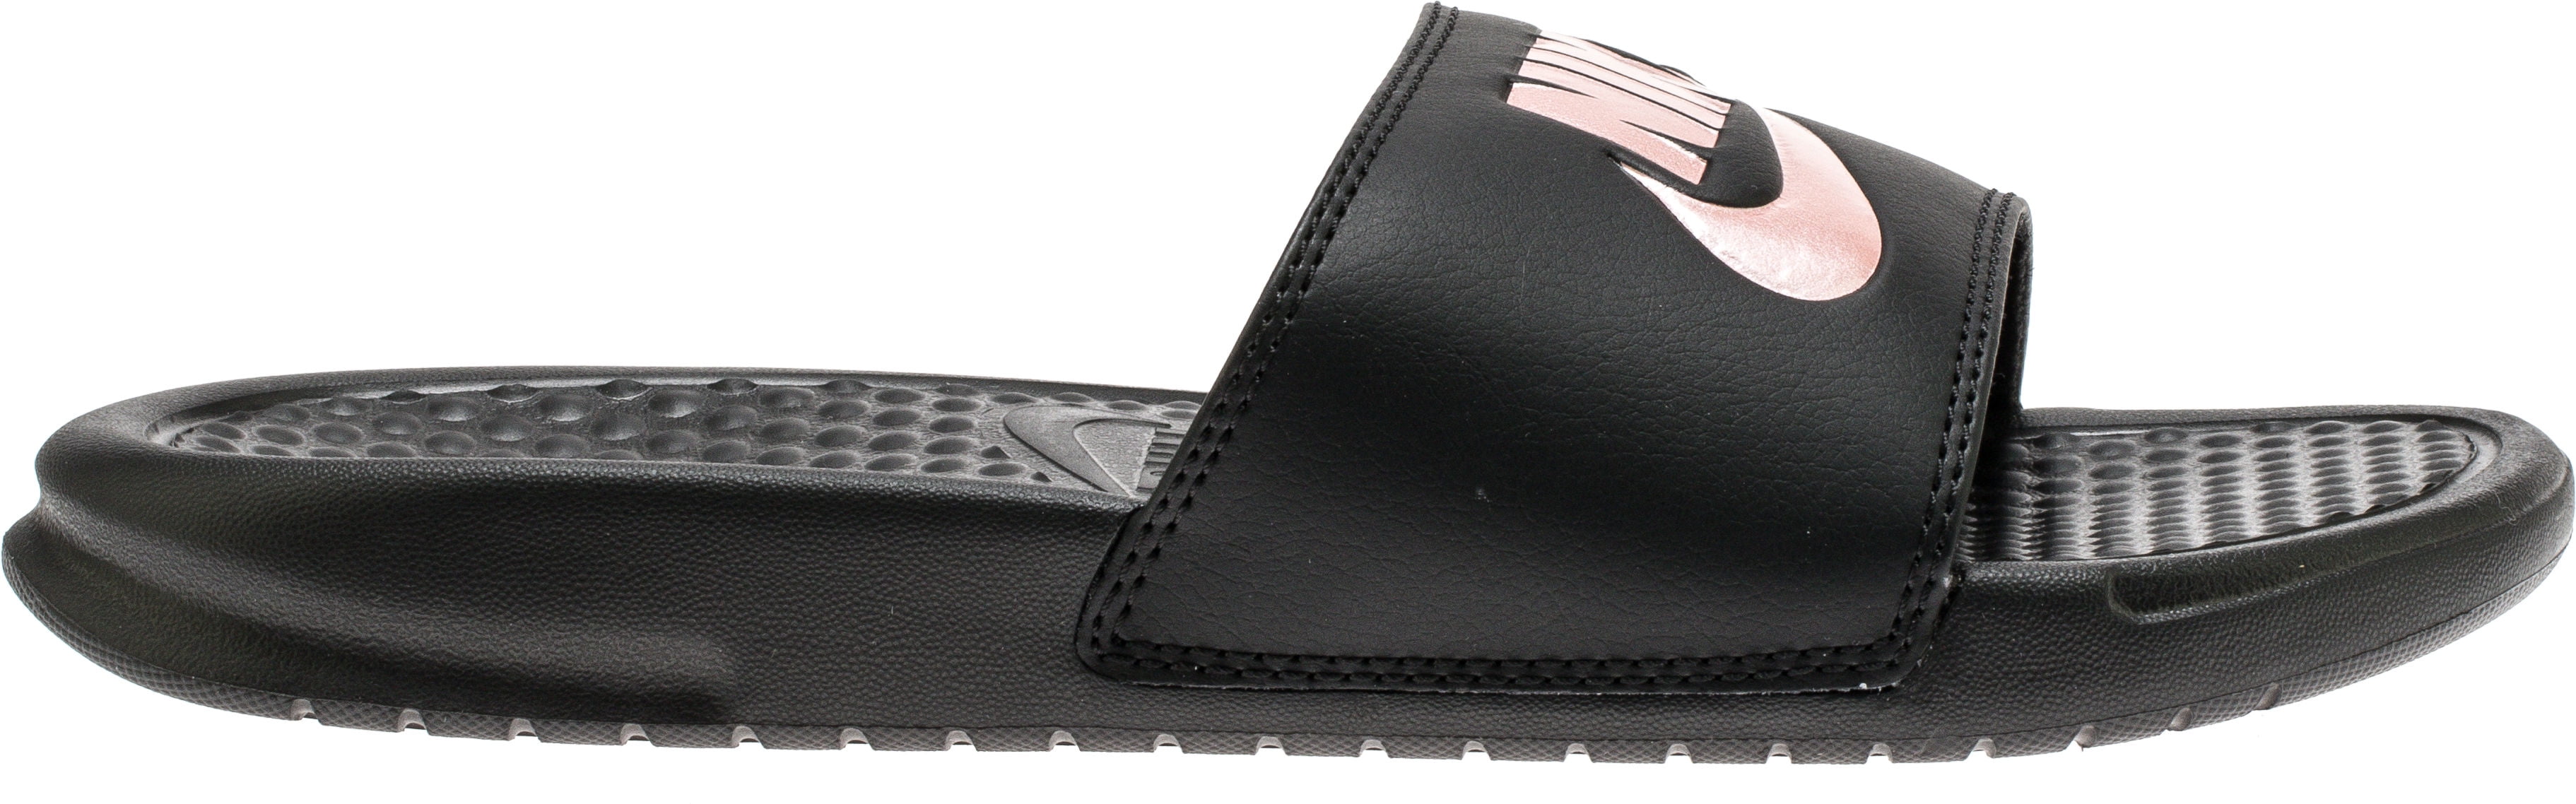 black and pink nike sandals